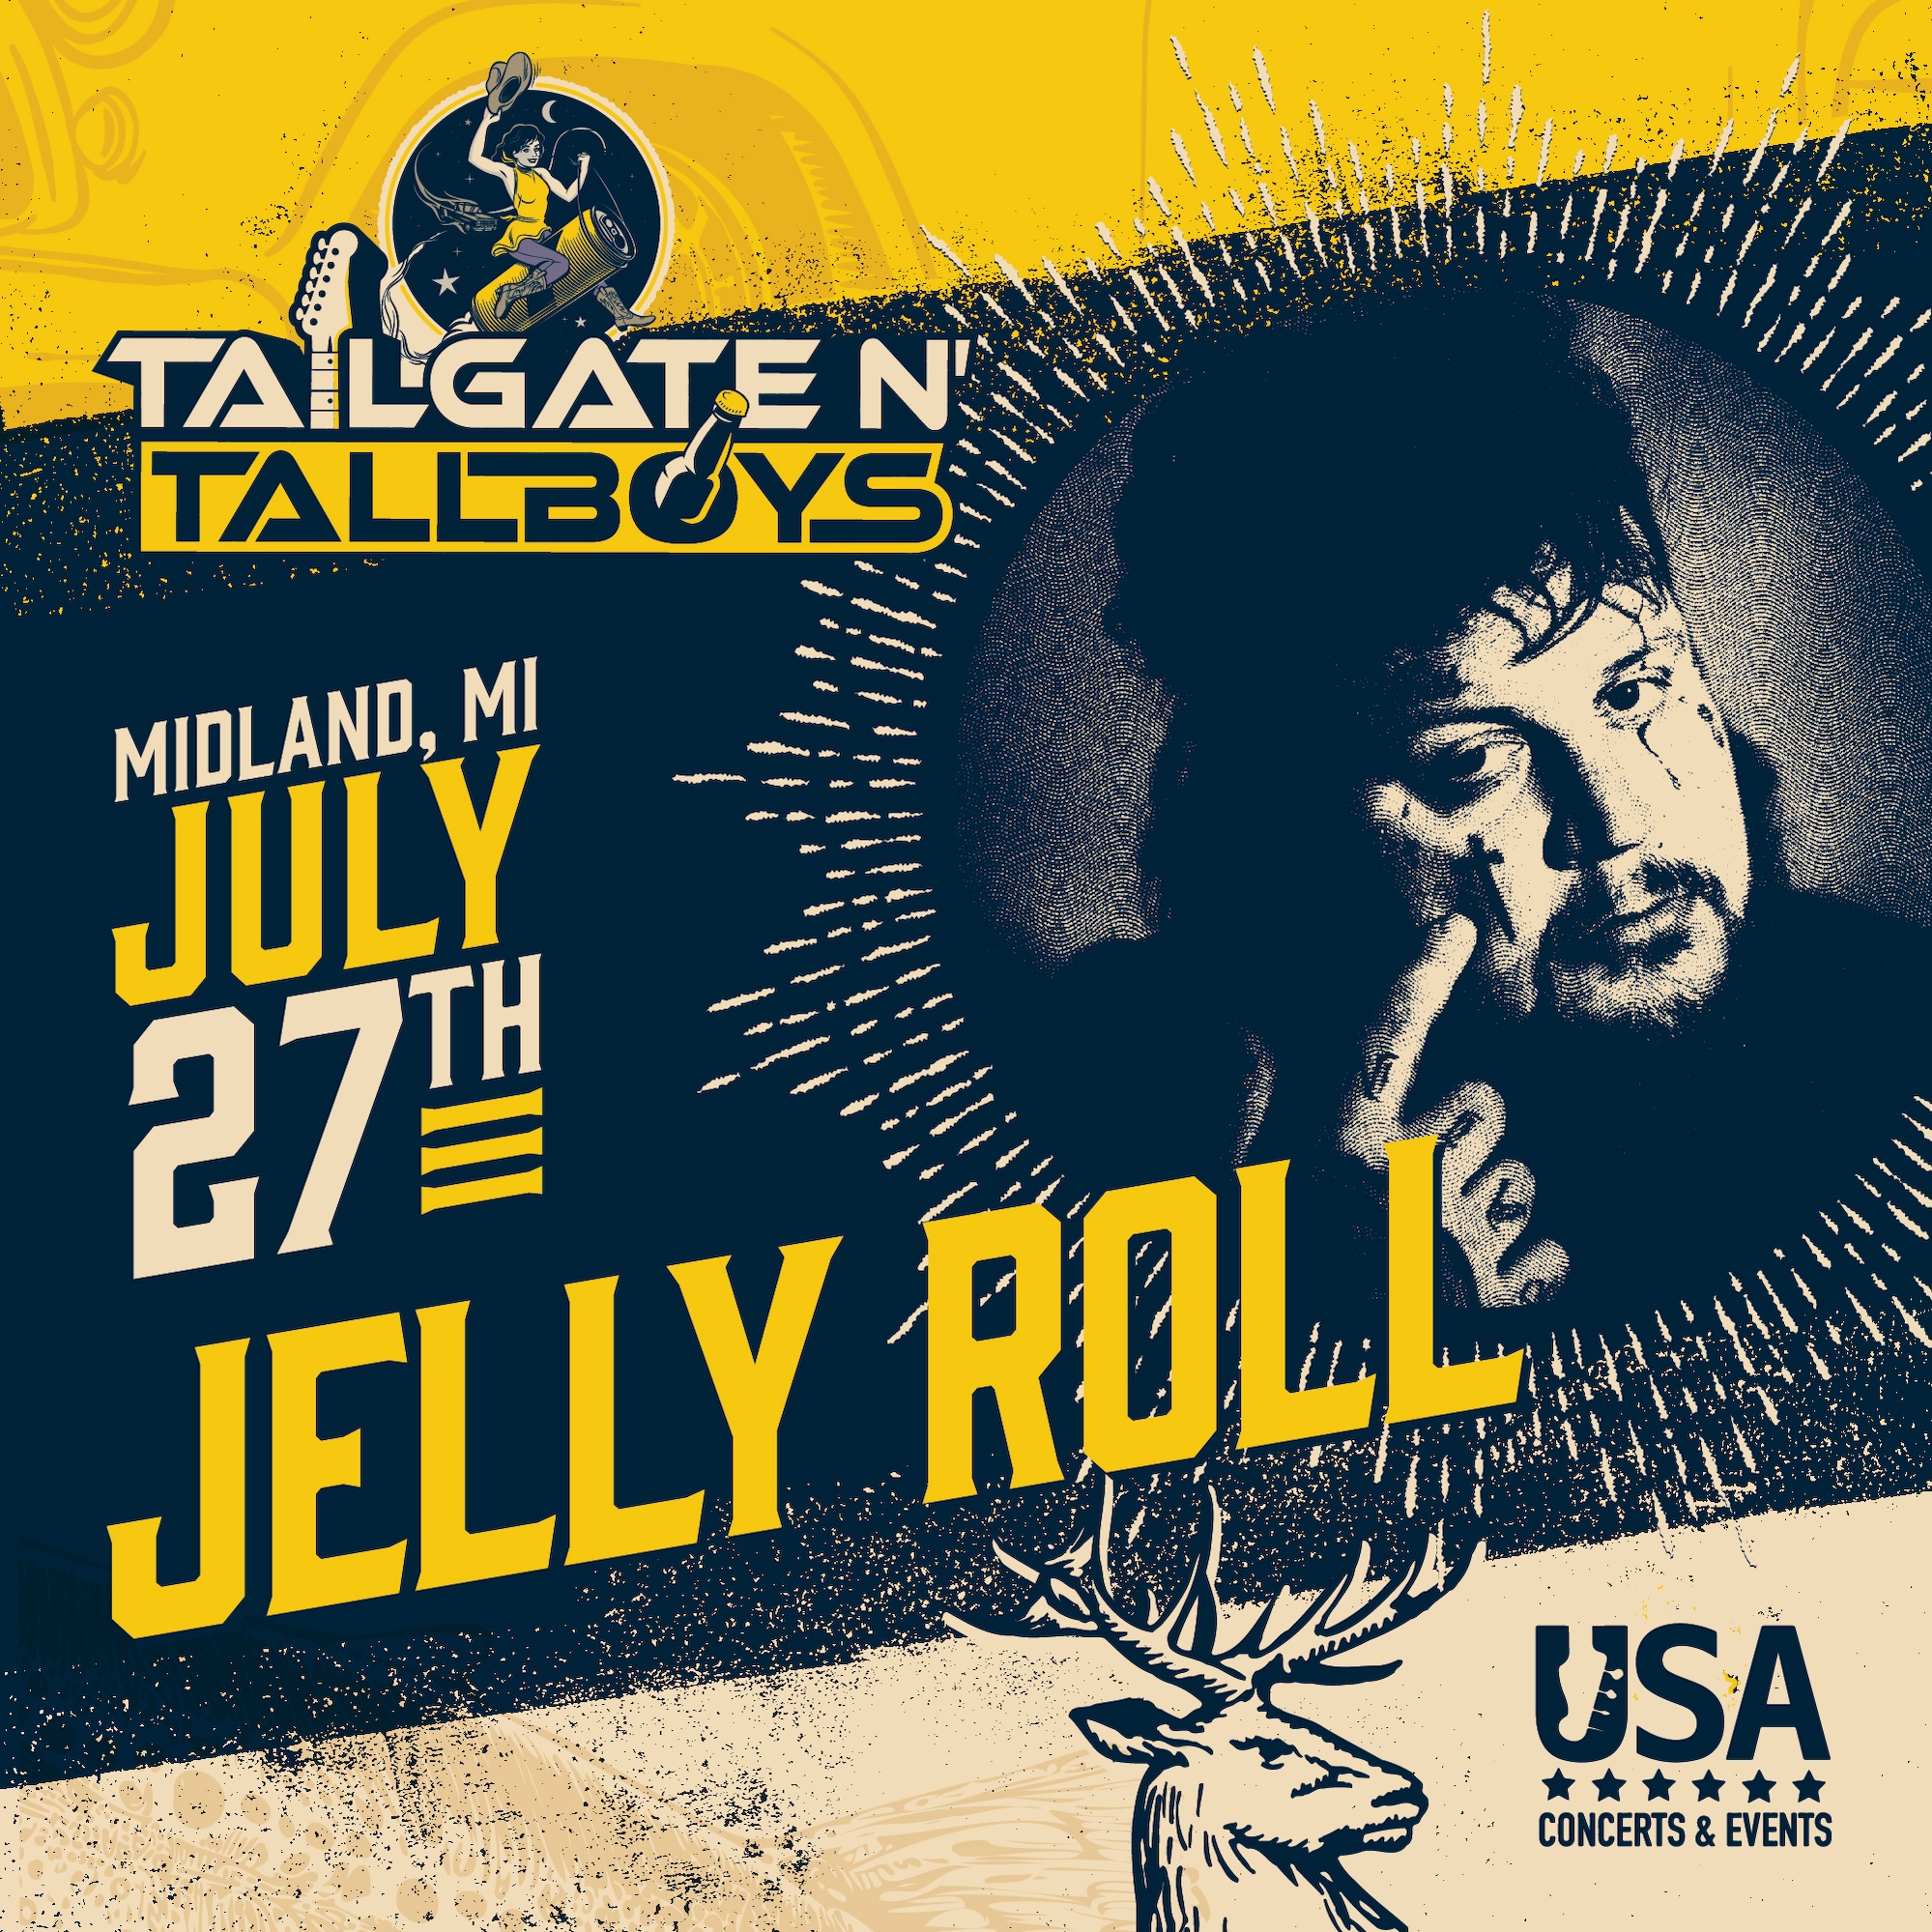 Jelly Roll Concert Tailgate N' Tallboys Michigan